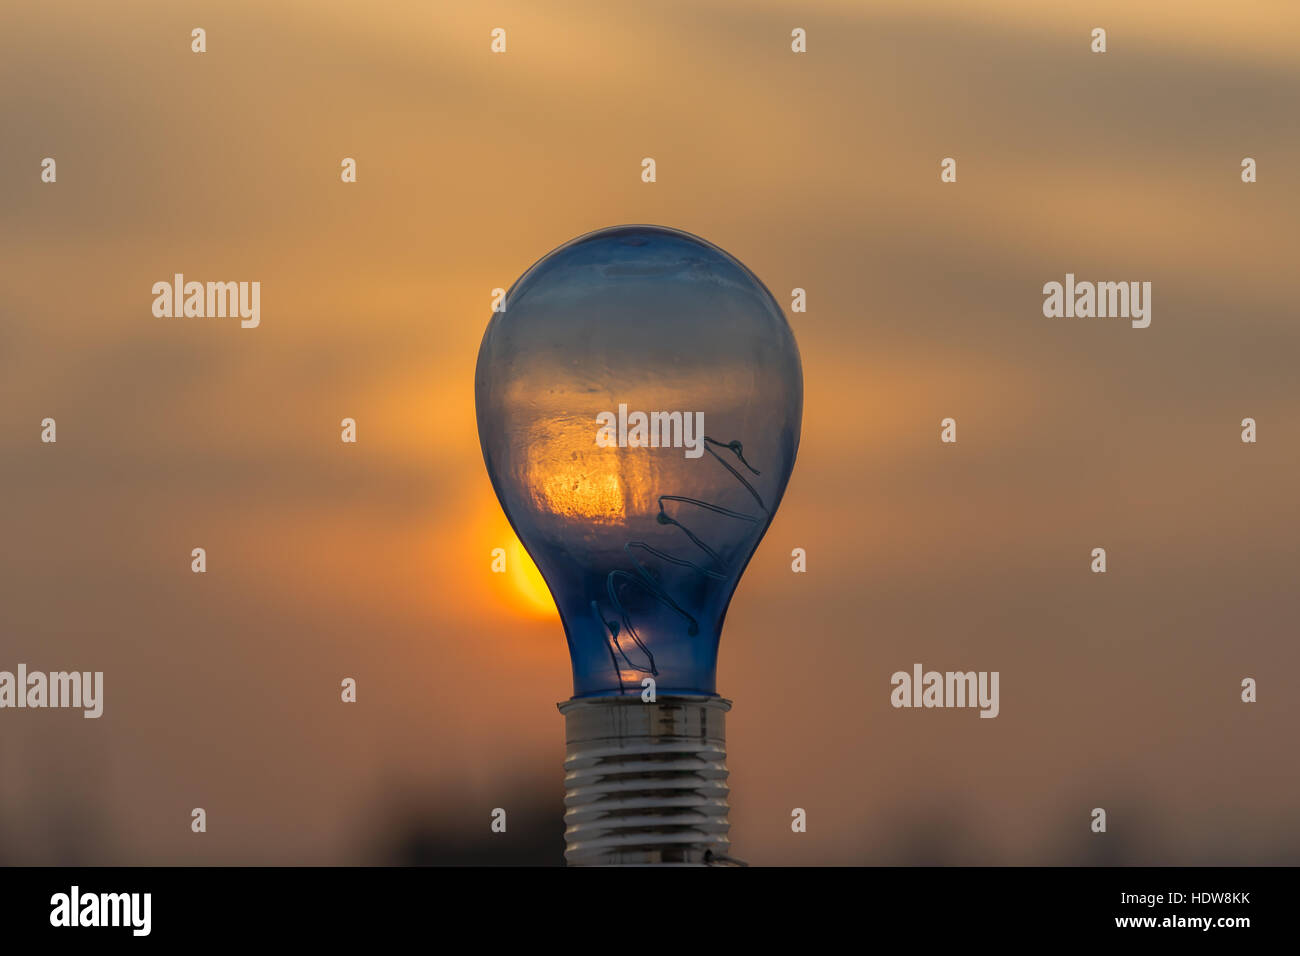 Bright idea, electric light bulb and sunset background. Stock Photo